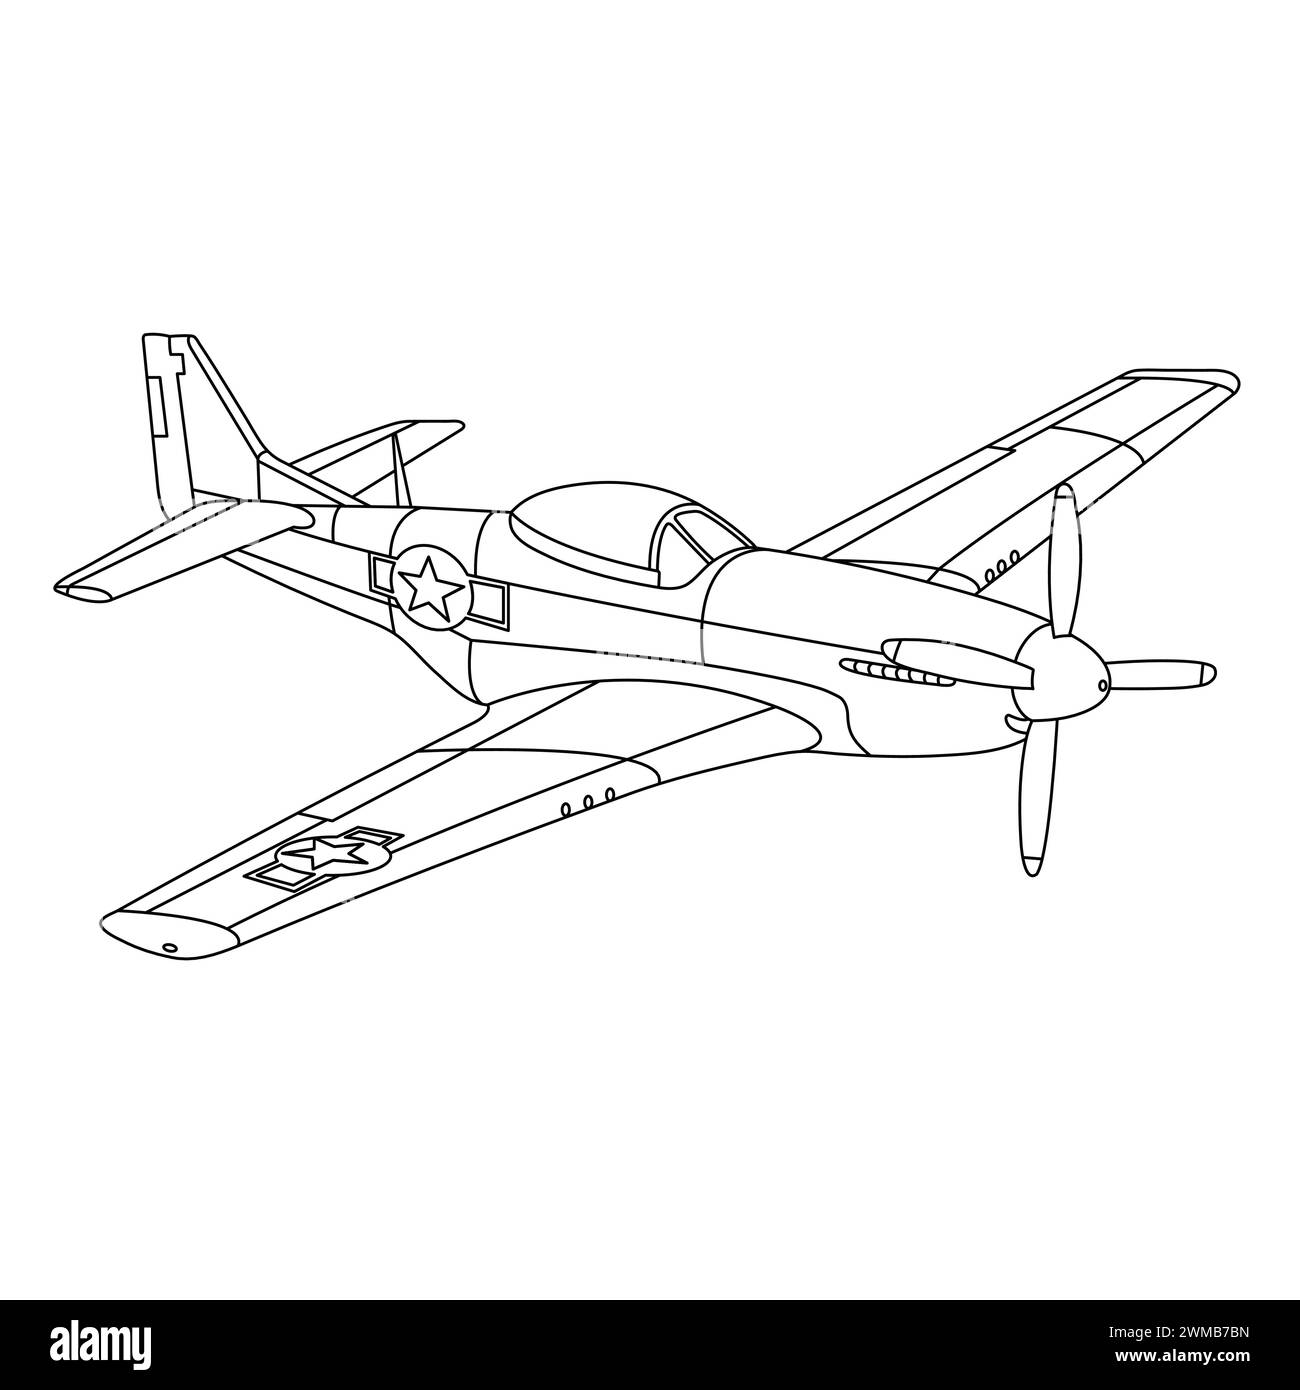 P-51 Mustang Aircraft War World II Fighter Coloring Page. Vintage War Plane. Cartoon Airplane. Military Fighter-Bomber Vector Illustration Stock Vector